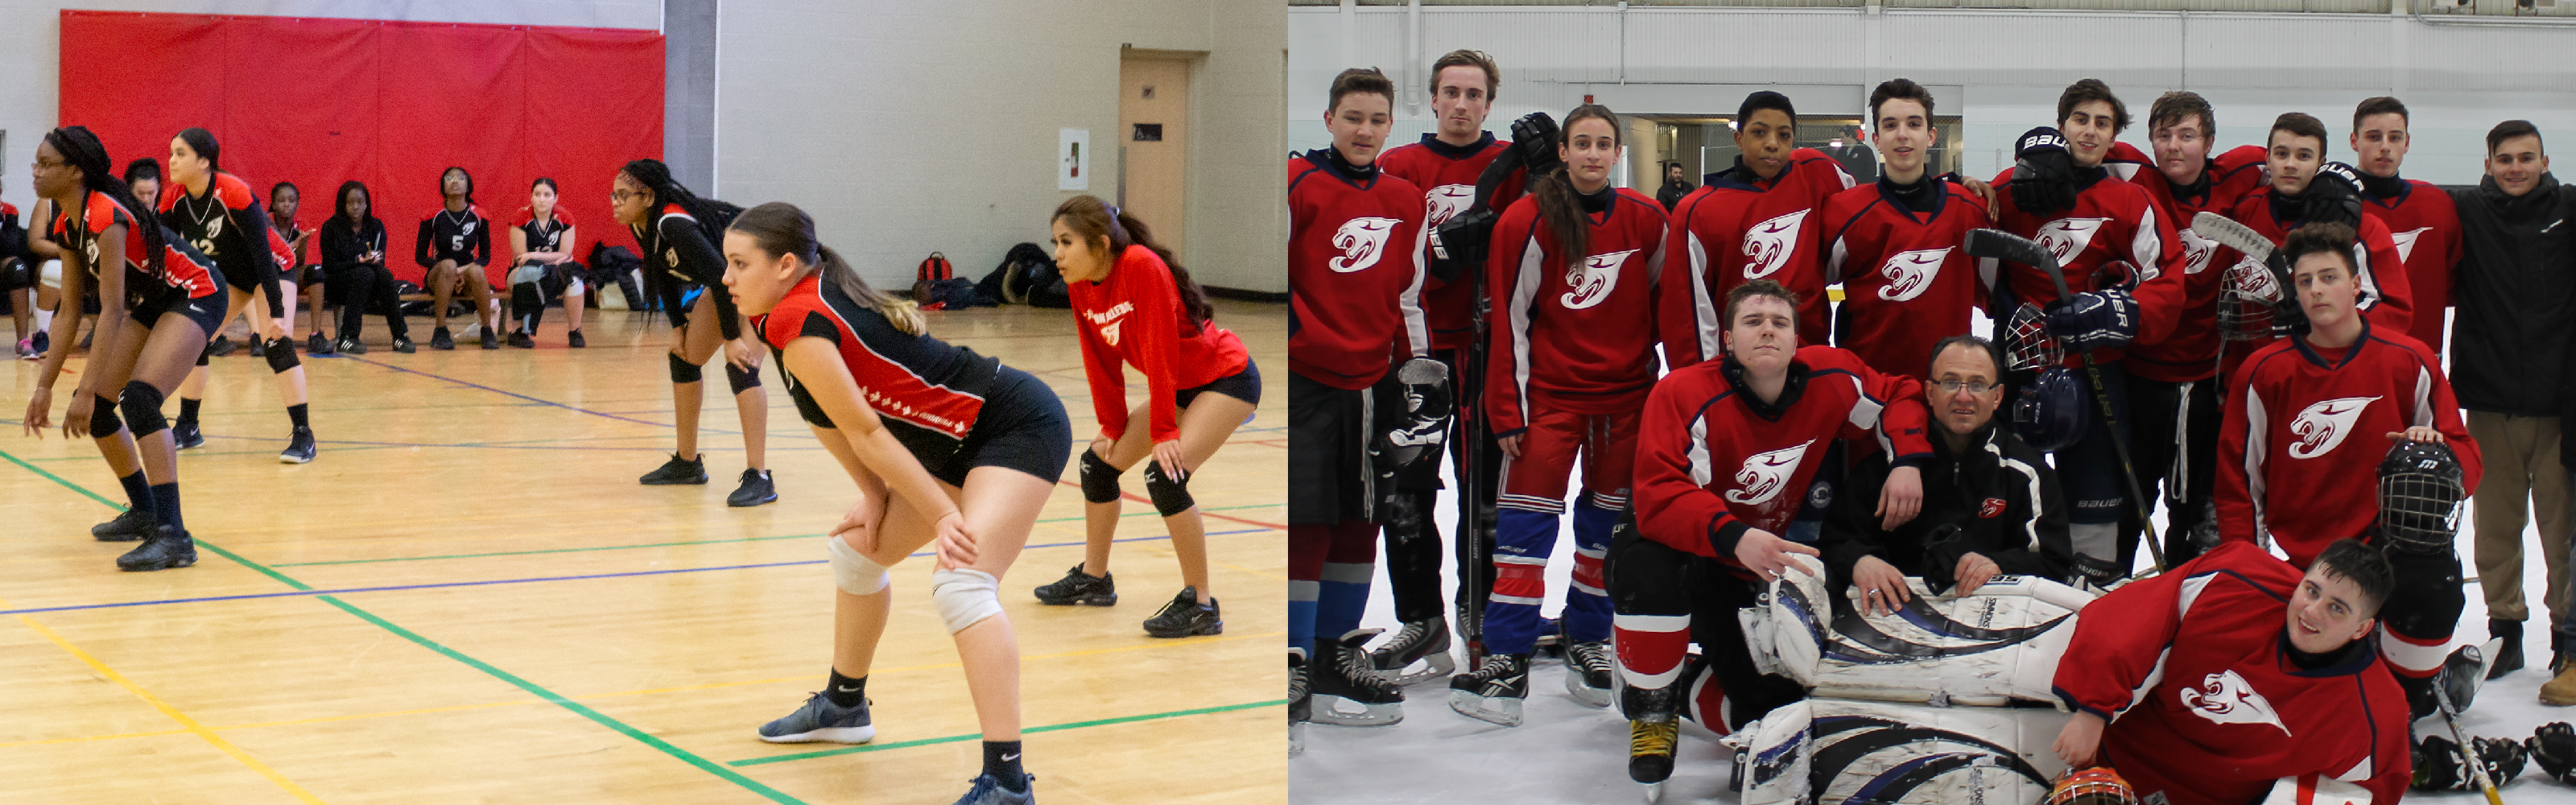 MPJ girls volleyball team on the left and boys hockey team on the right